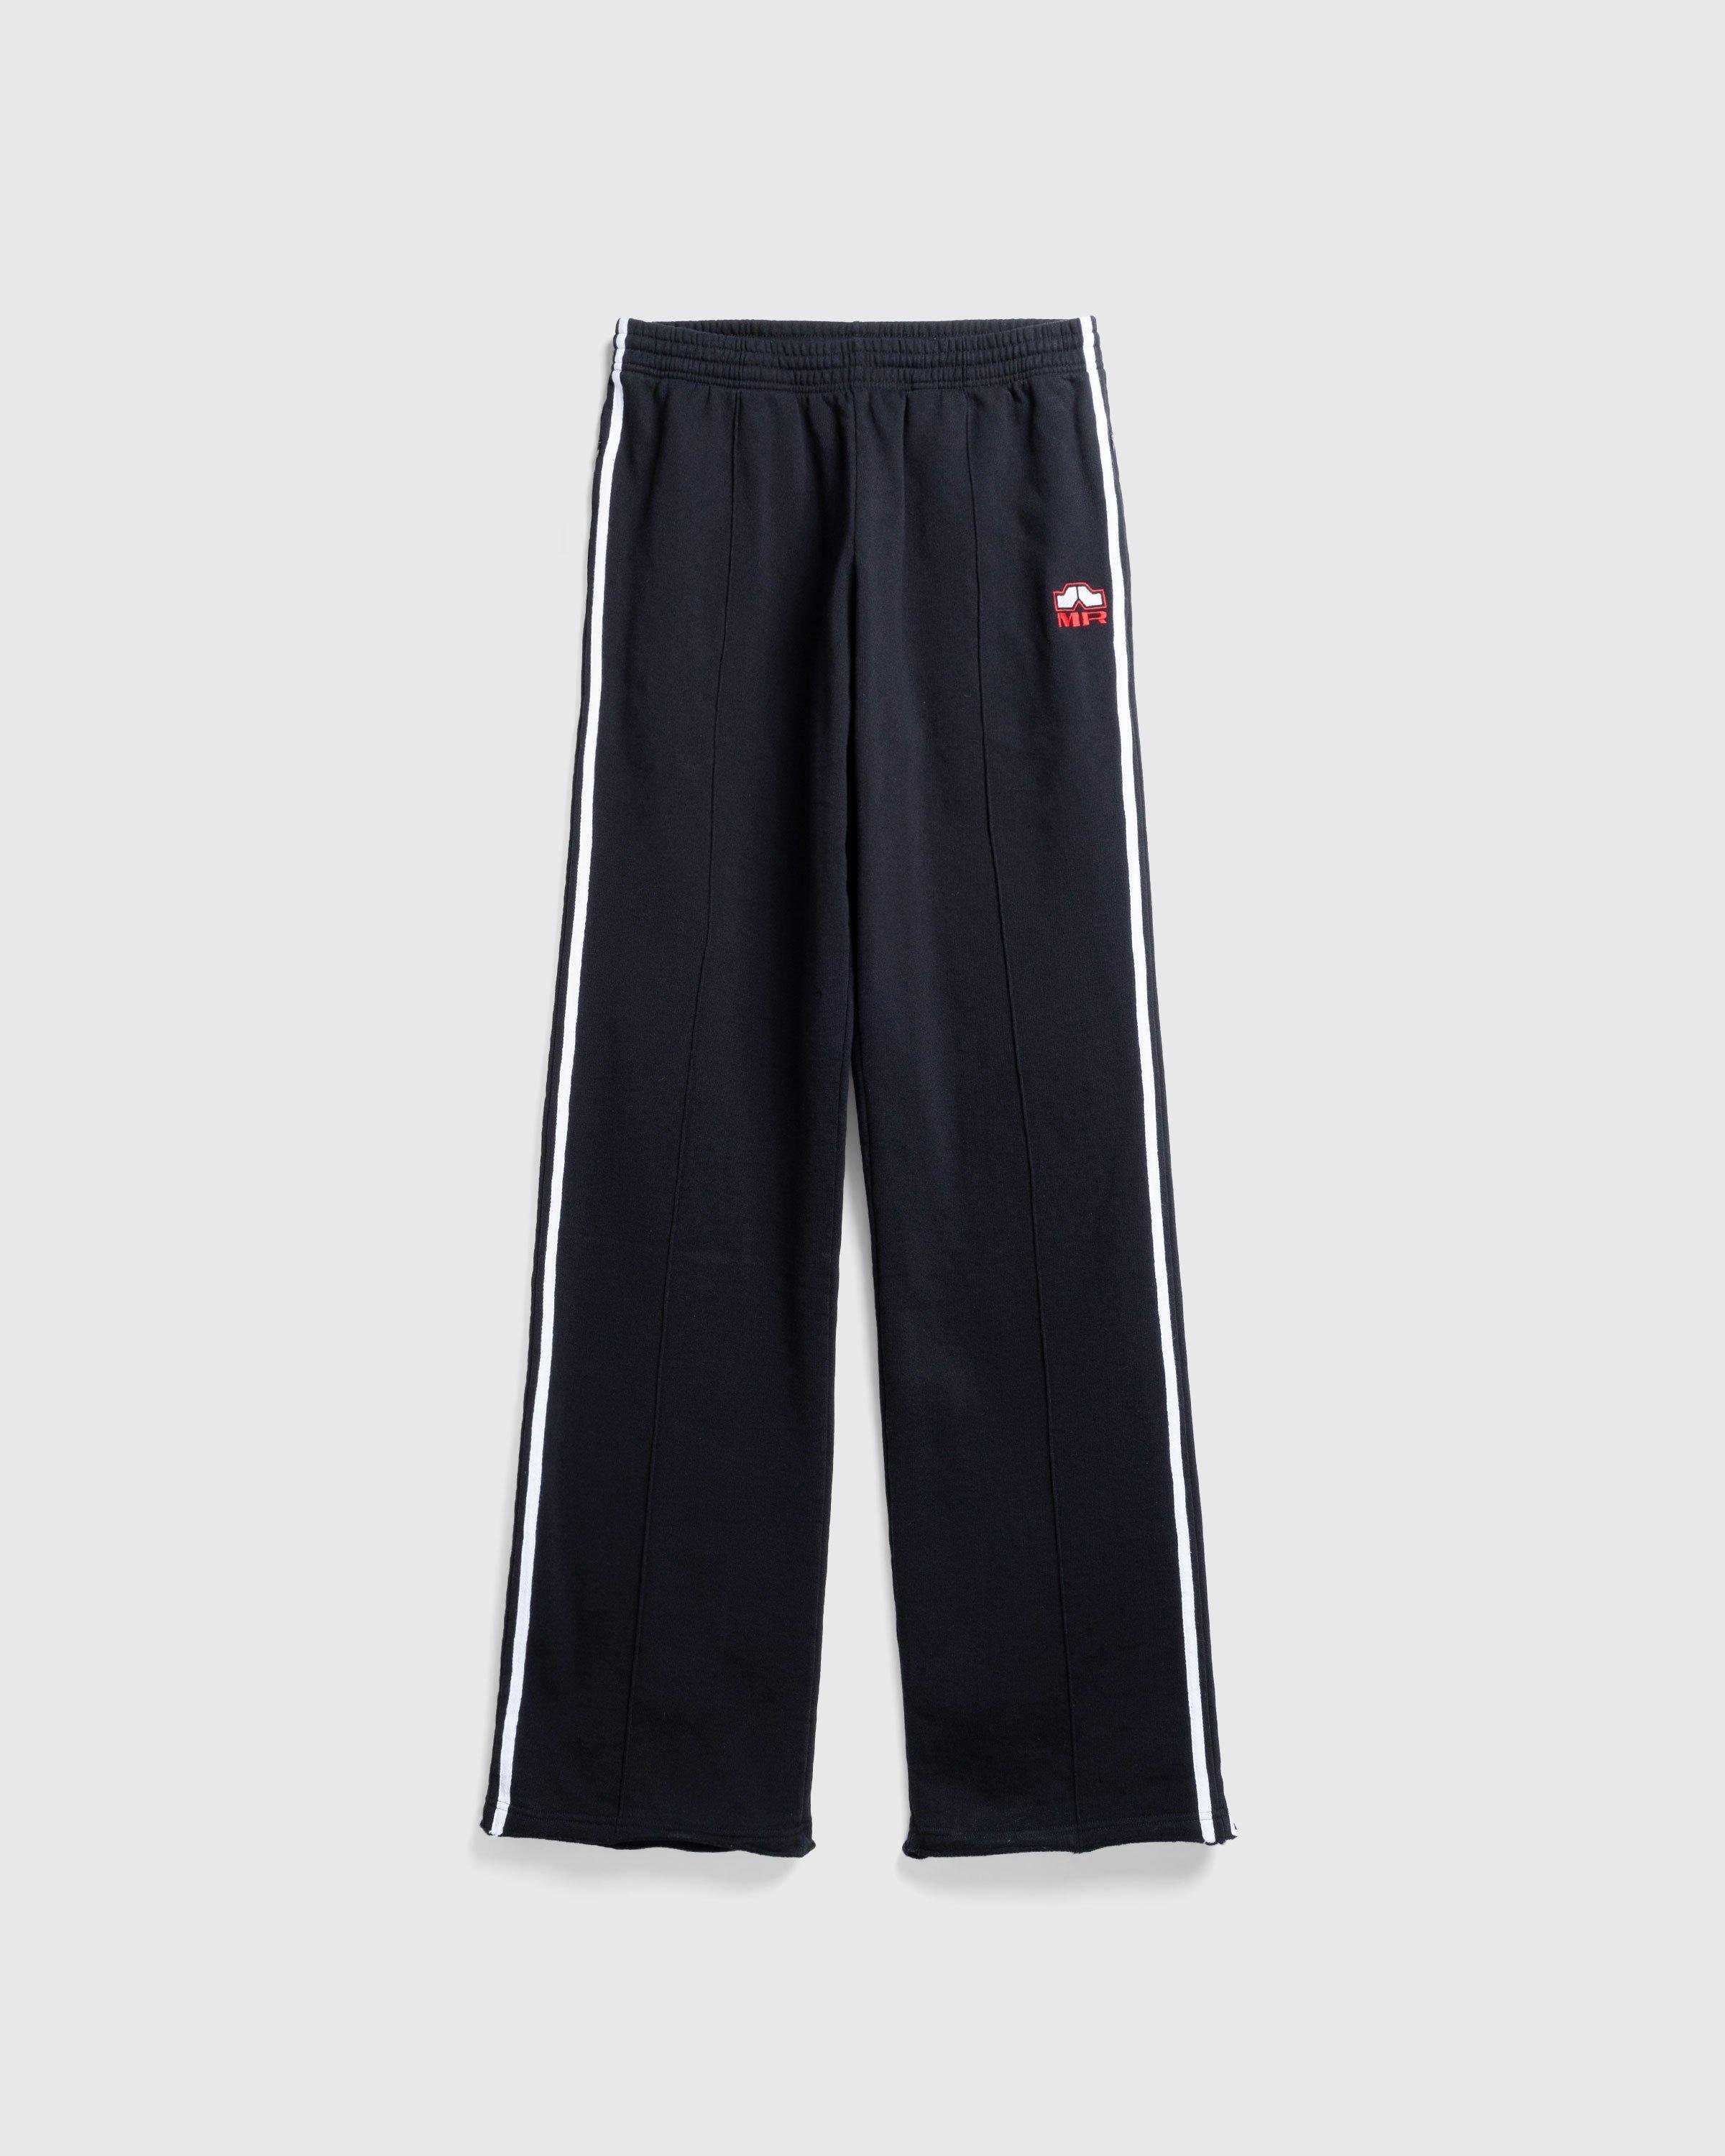 Martine RoseWide Leg Trackpant Black by HIGHSNOBIETY